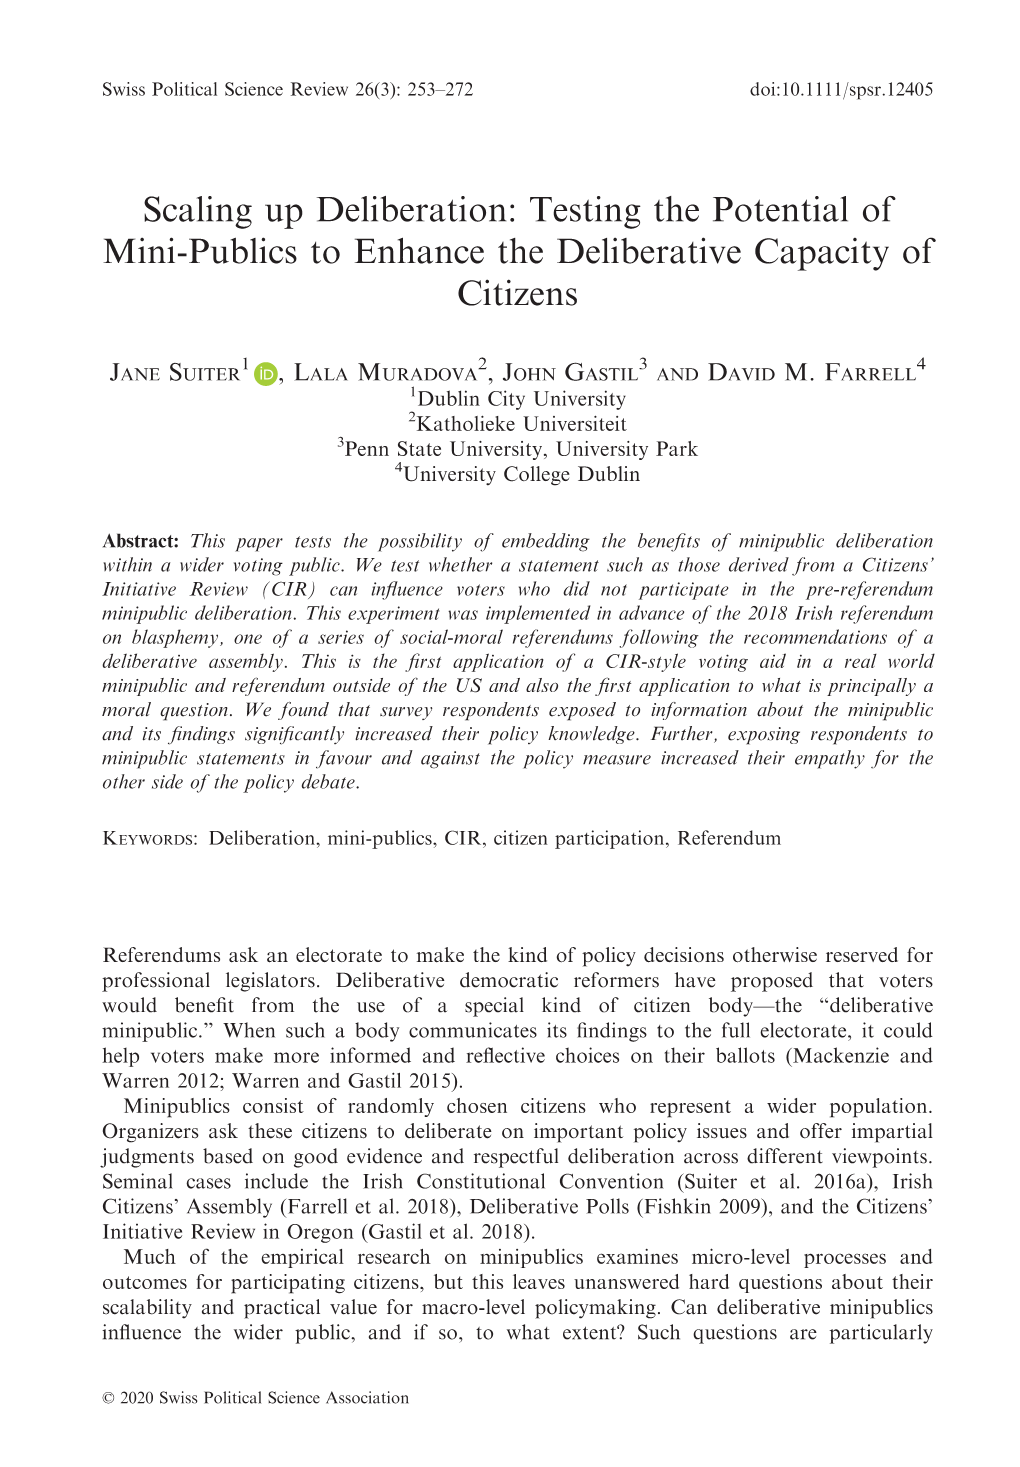 Scaling up Deliberation: Testing the Potential of Mini-Publics to Enhance the Deliberative Capacity of Citizens